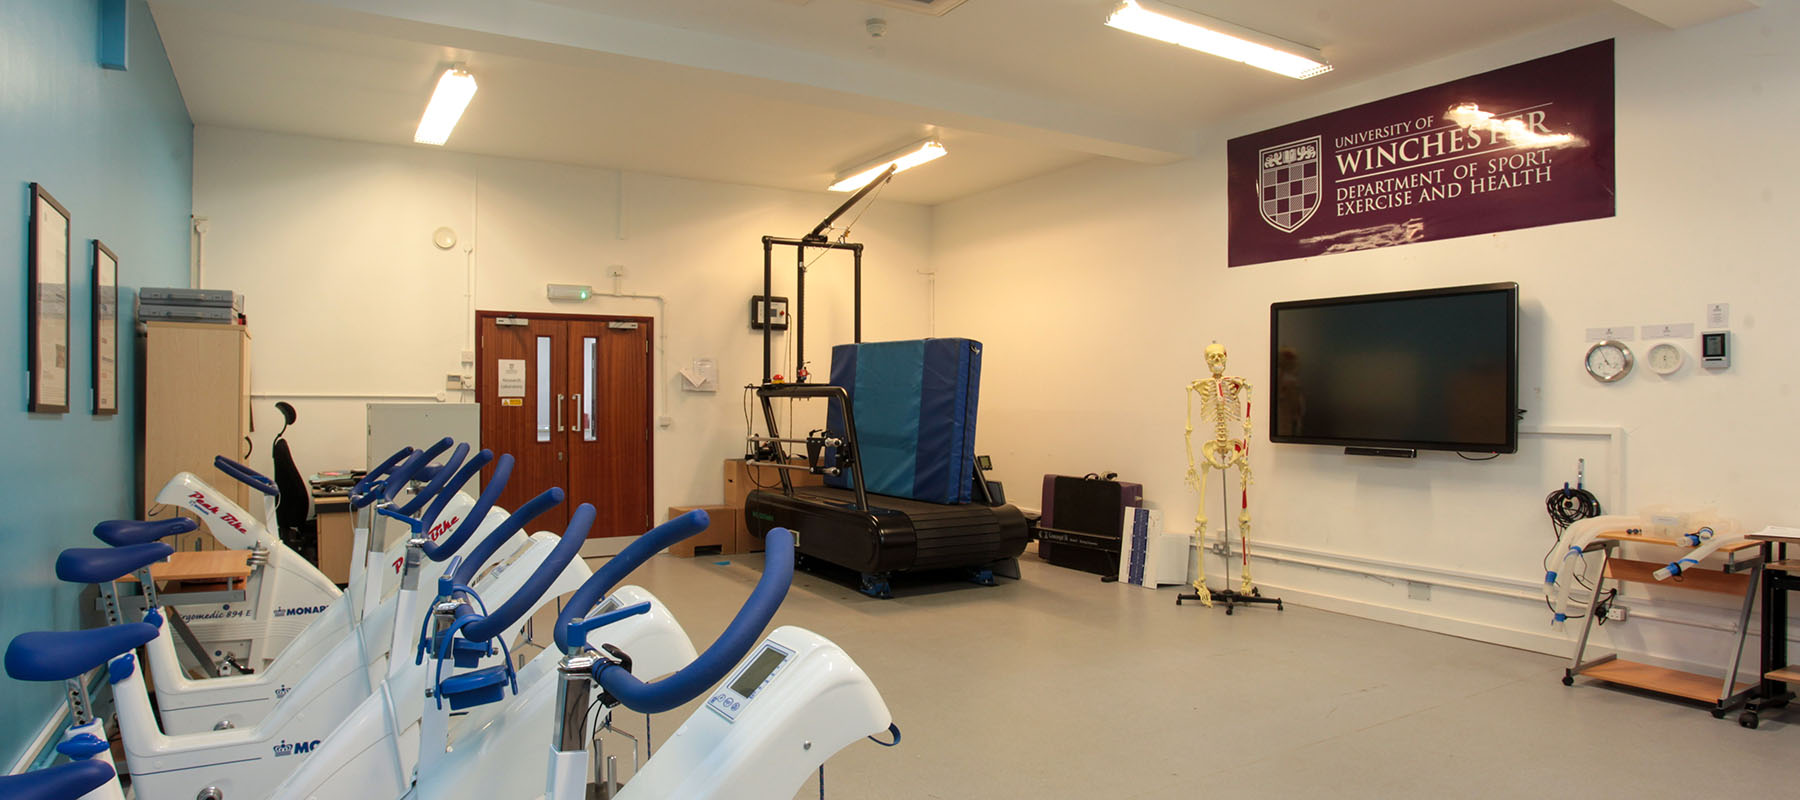 Research and Teaching facilities at the University of Winchester: one of our state-of-the-art Sport Science laboratories